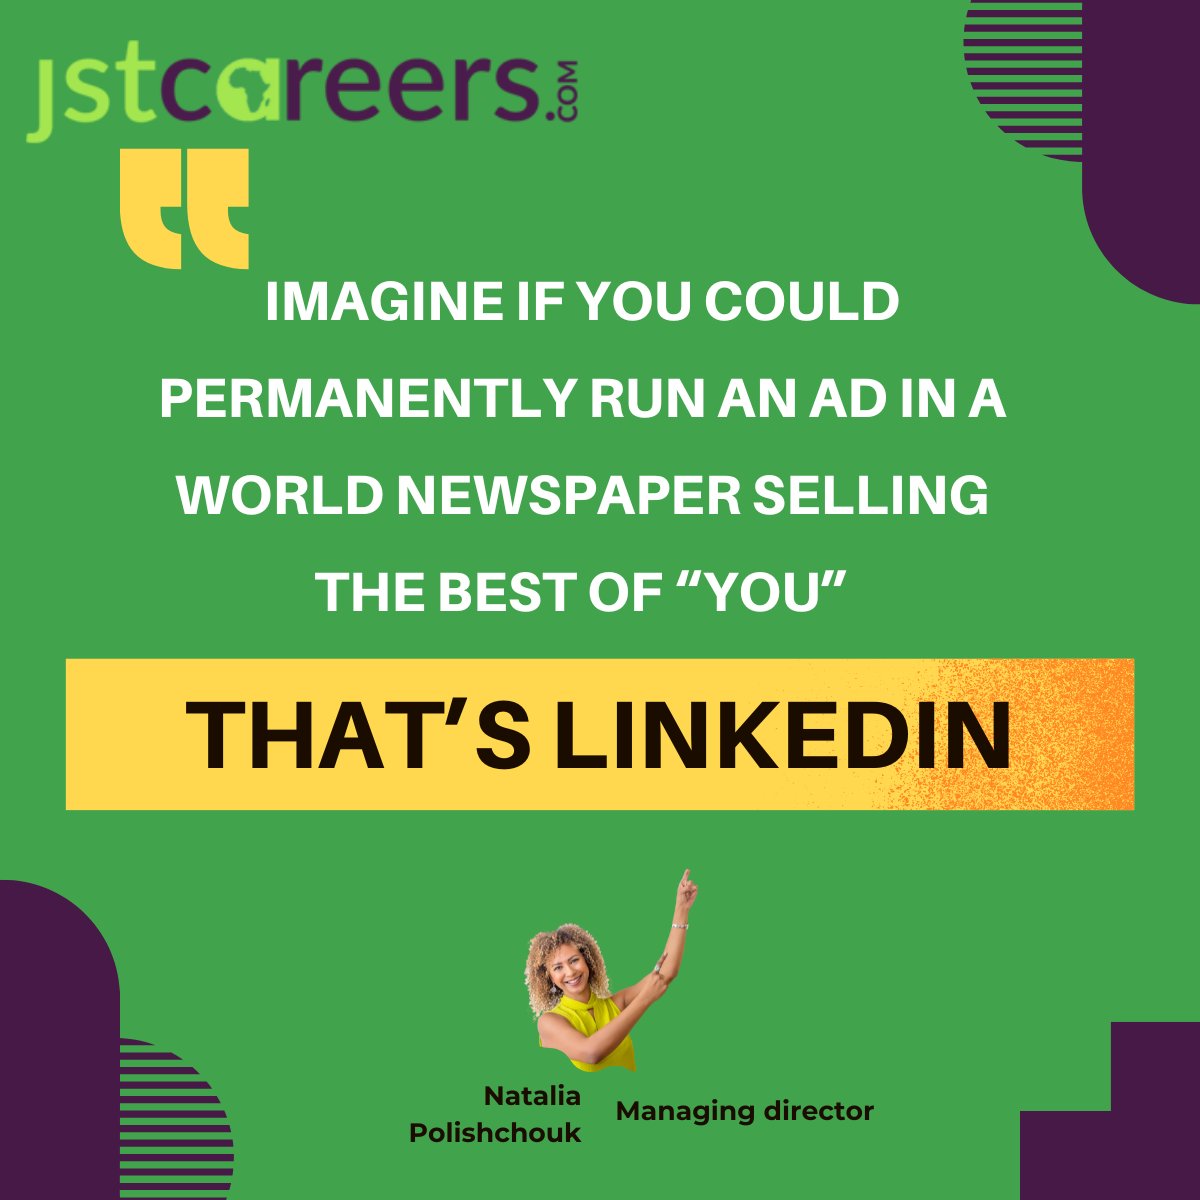 How are you building your online personal brand?

How are you leaving your digital footsteps?

#linkedin #linkedinoptimization #linkedinconnection #linkedinjobs #digital #digitalcareers